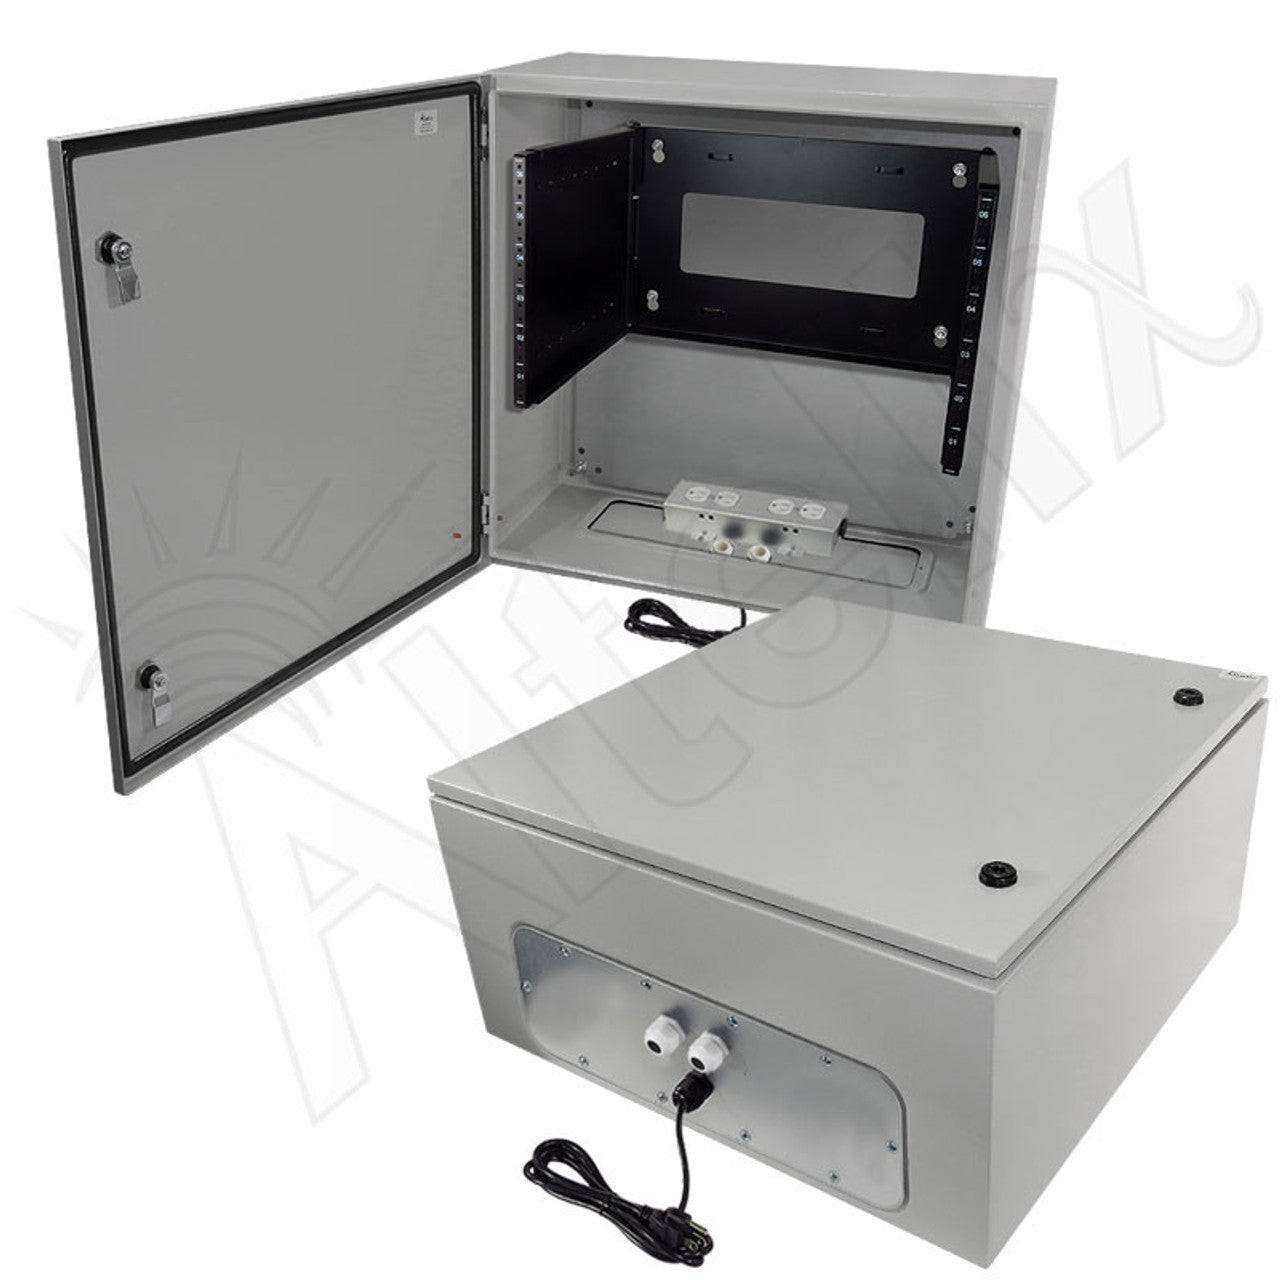 Altelix 19" Wide 6U Rack NEMA 4X Steel Weatherproof Enclosure with 120 VAC Outlets and Power Cord